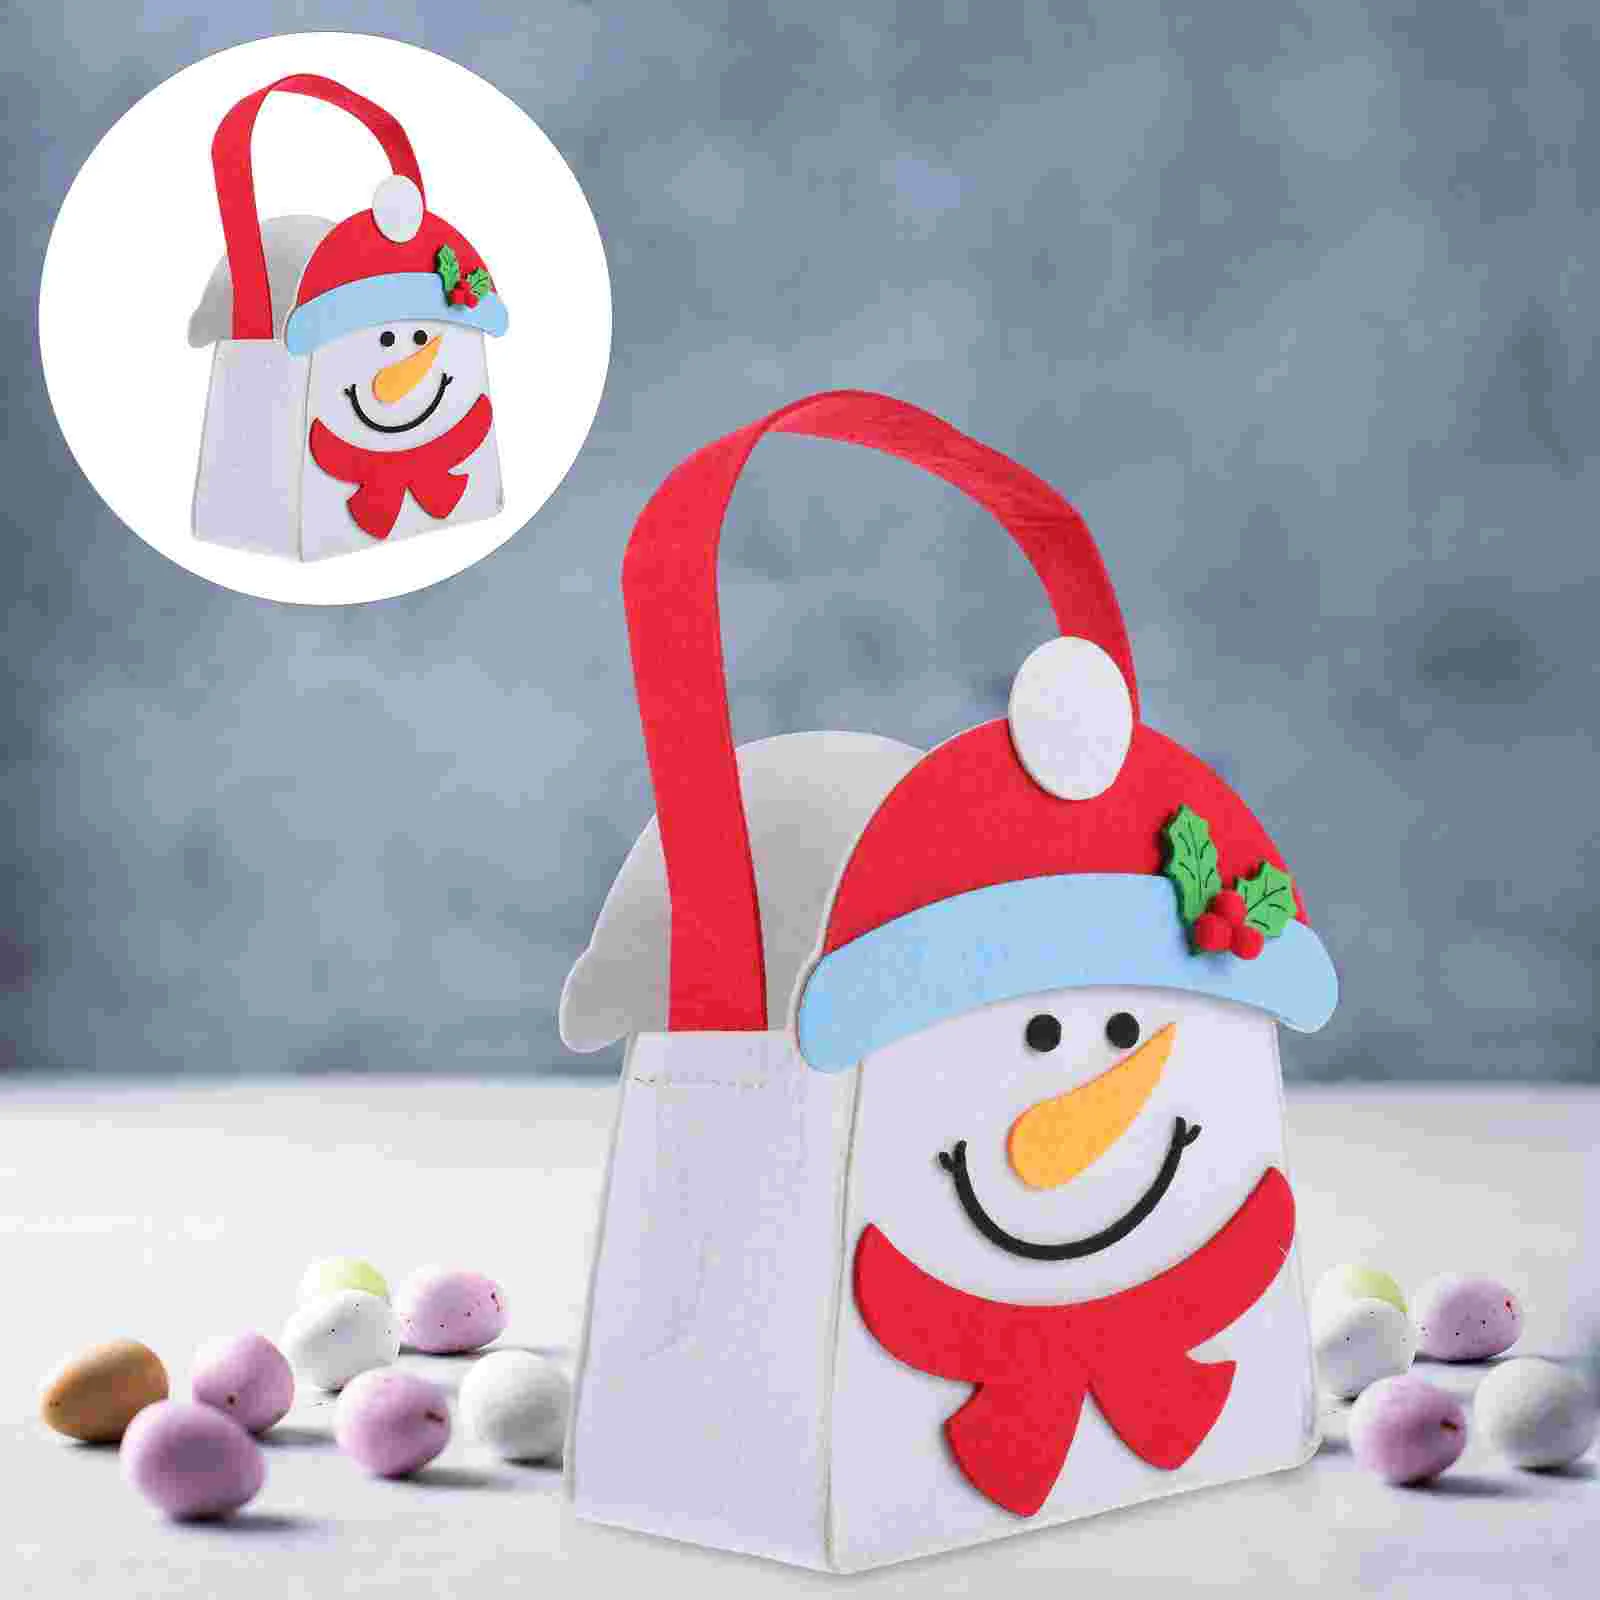 

Christmaspouch Storage Gift Gifts Practical Packing Party Treats Claus Candy Goodie Container Santa Festive Themed Diy Felt